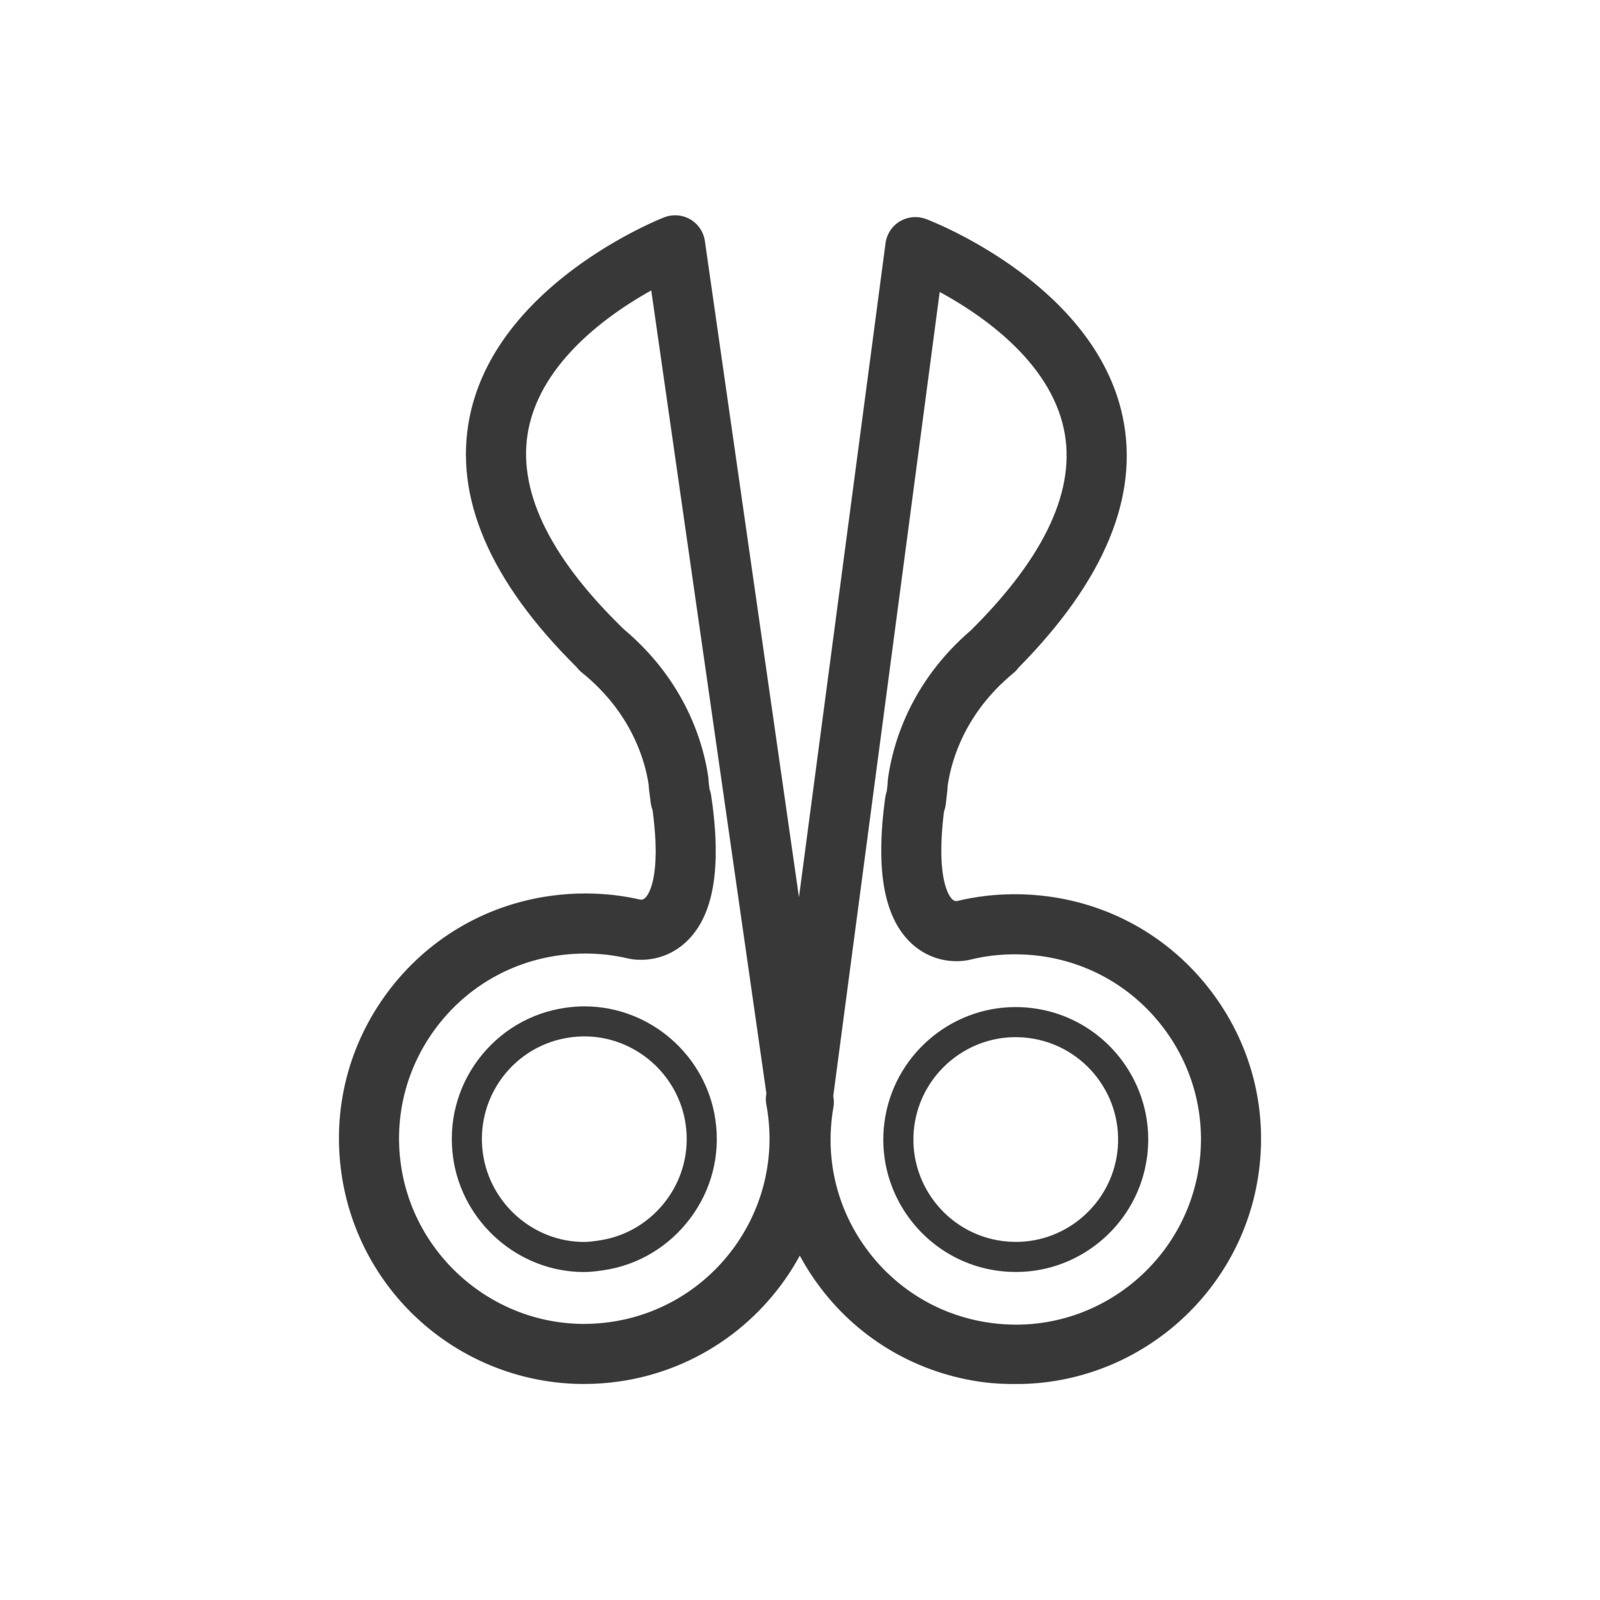 Scissors icon line style by PAPAGraph